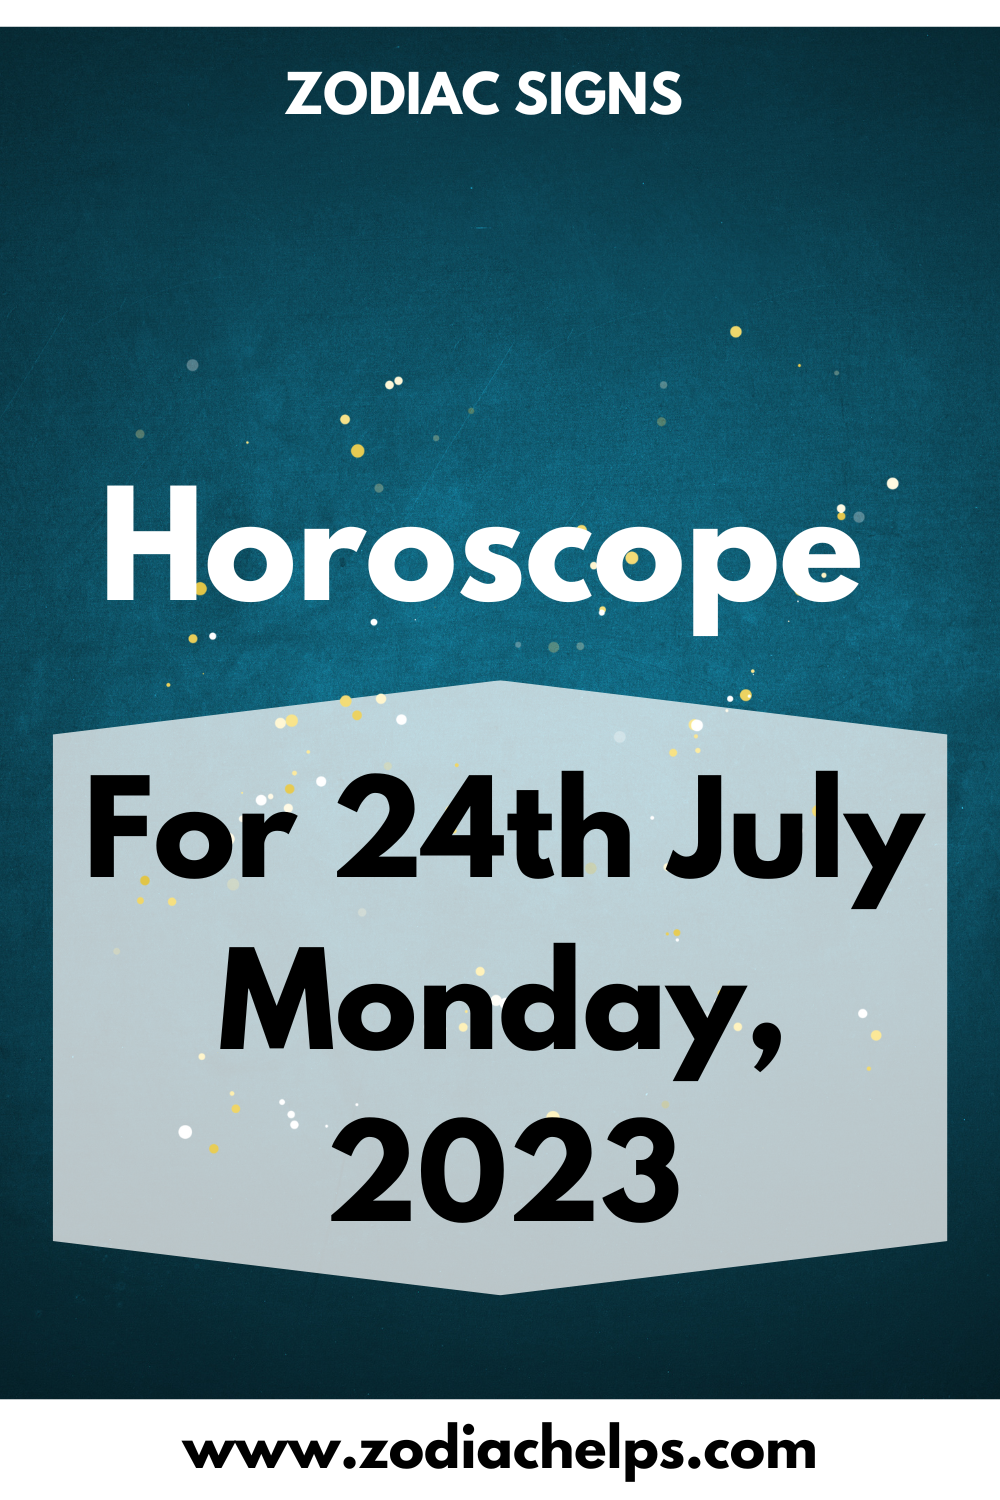 For 24th July Monday, 2023